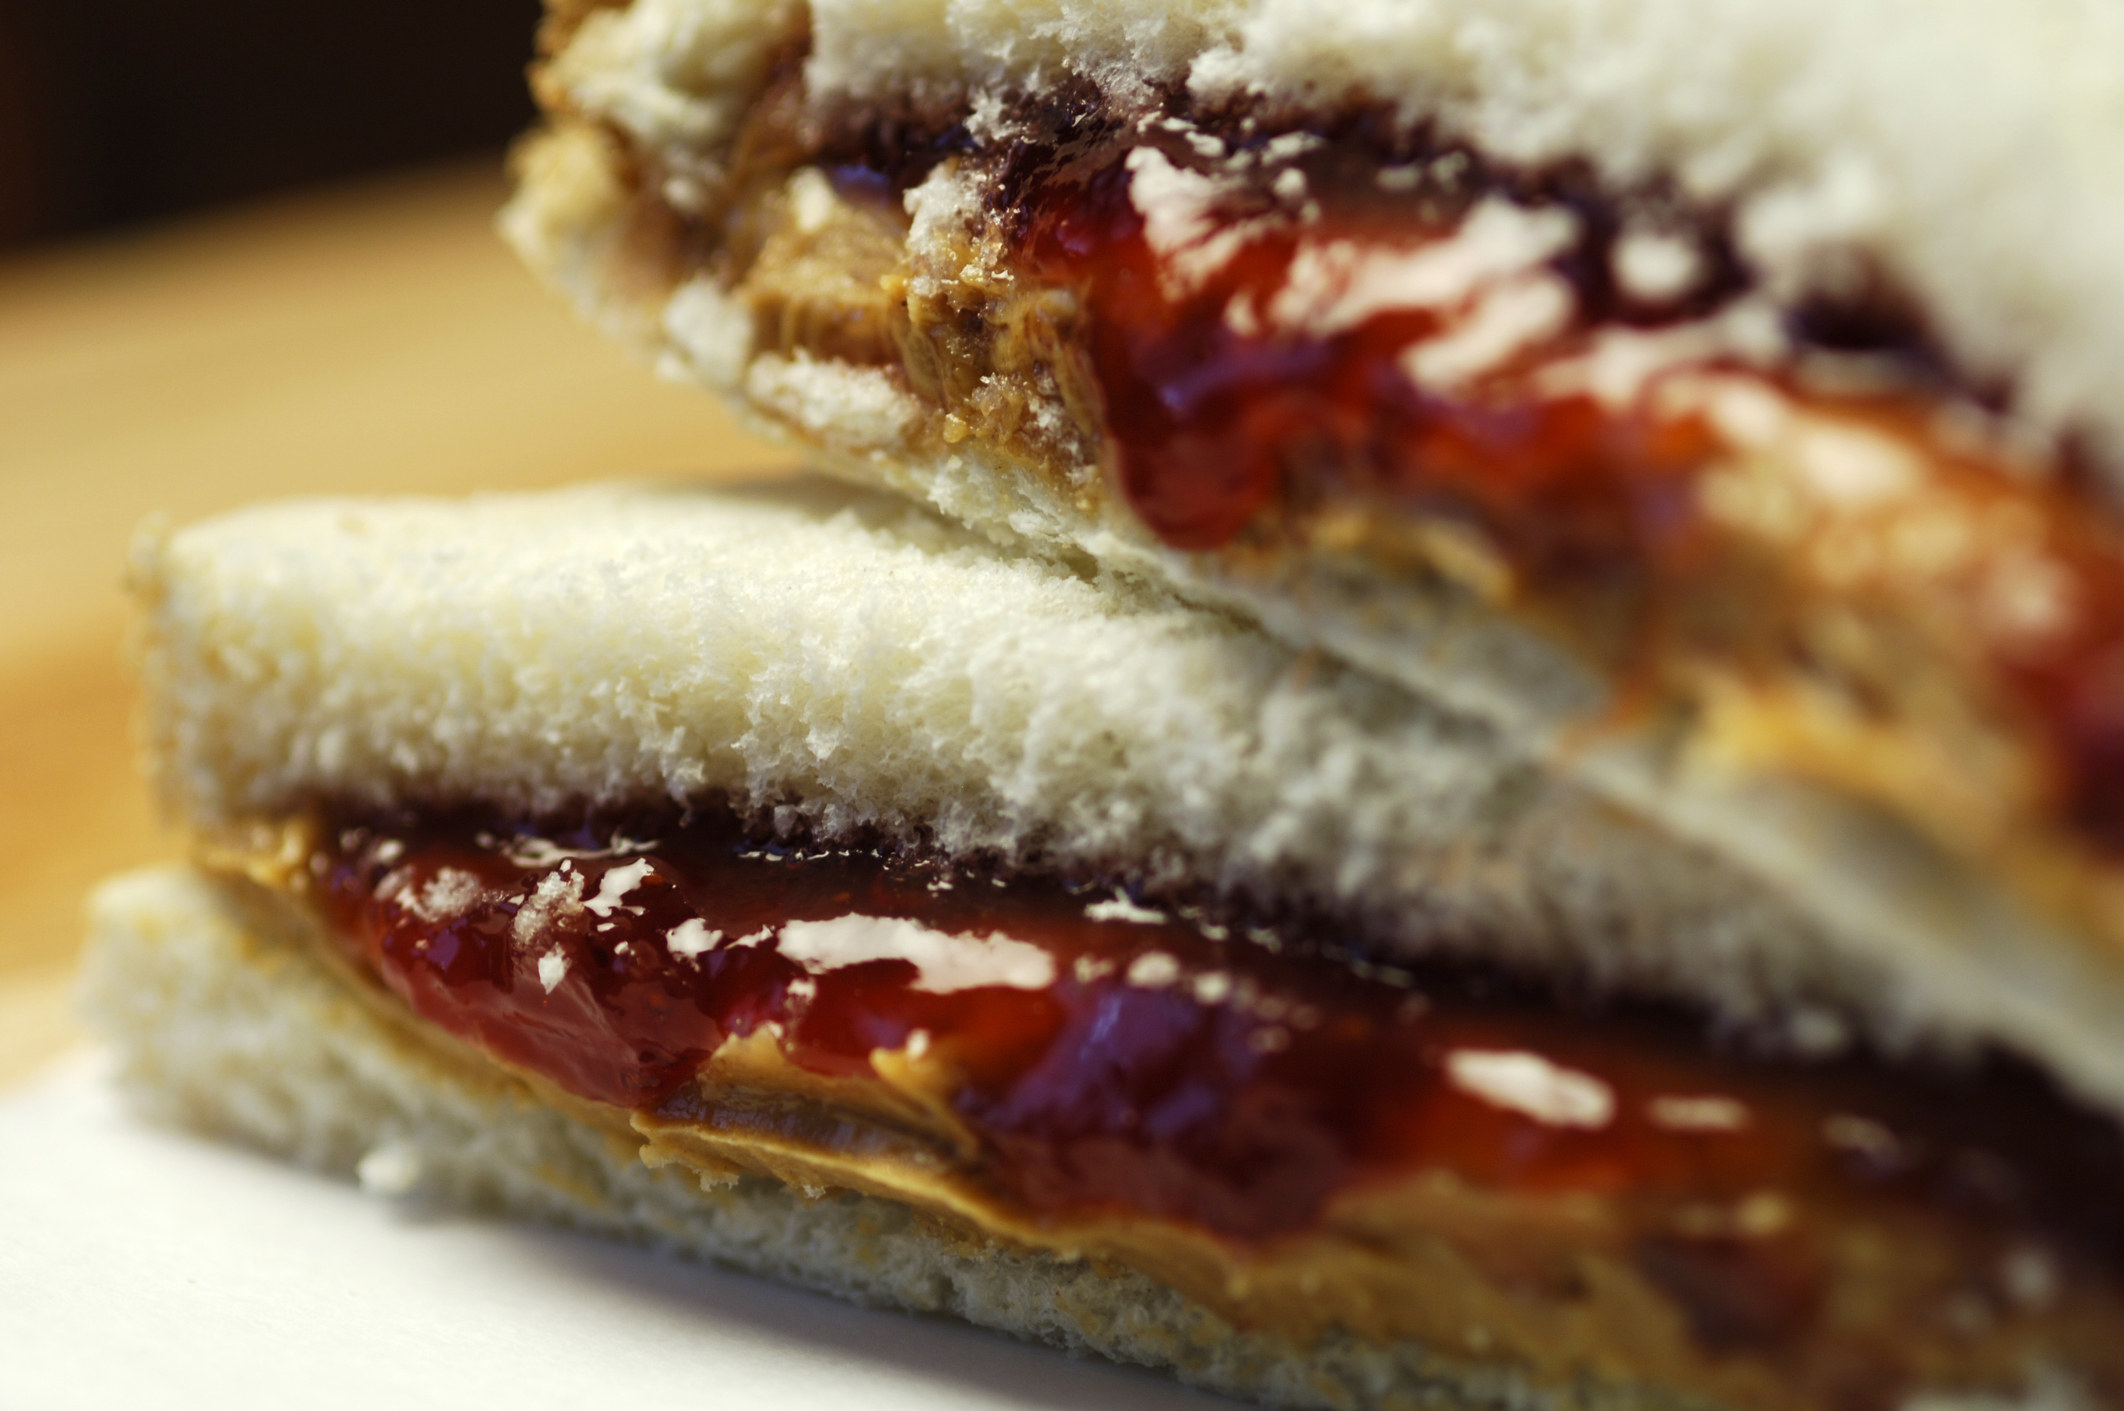 Close up of peanut butter and jelly sandwich on white bread